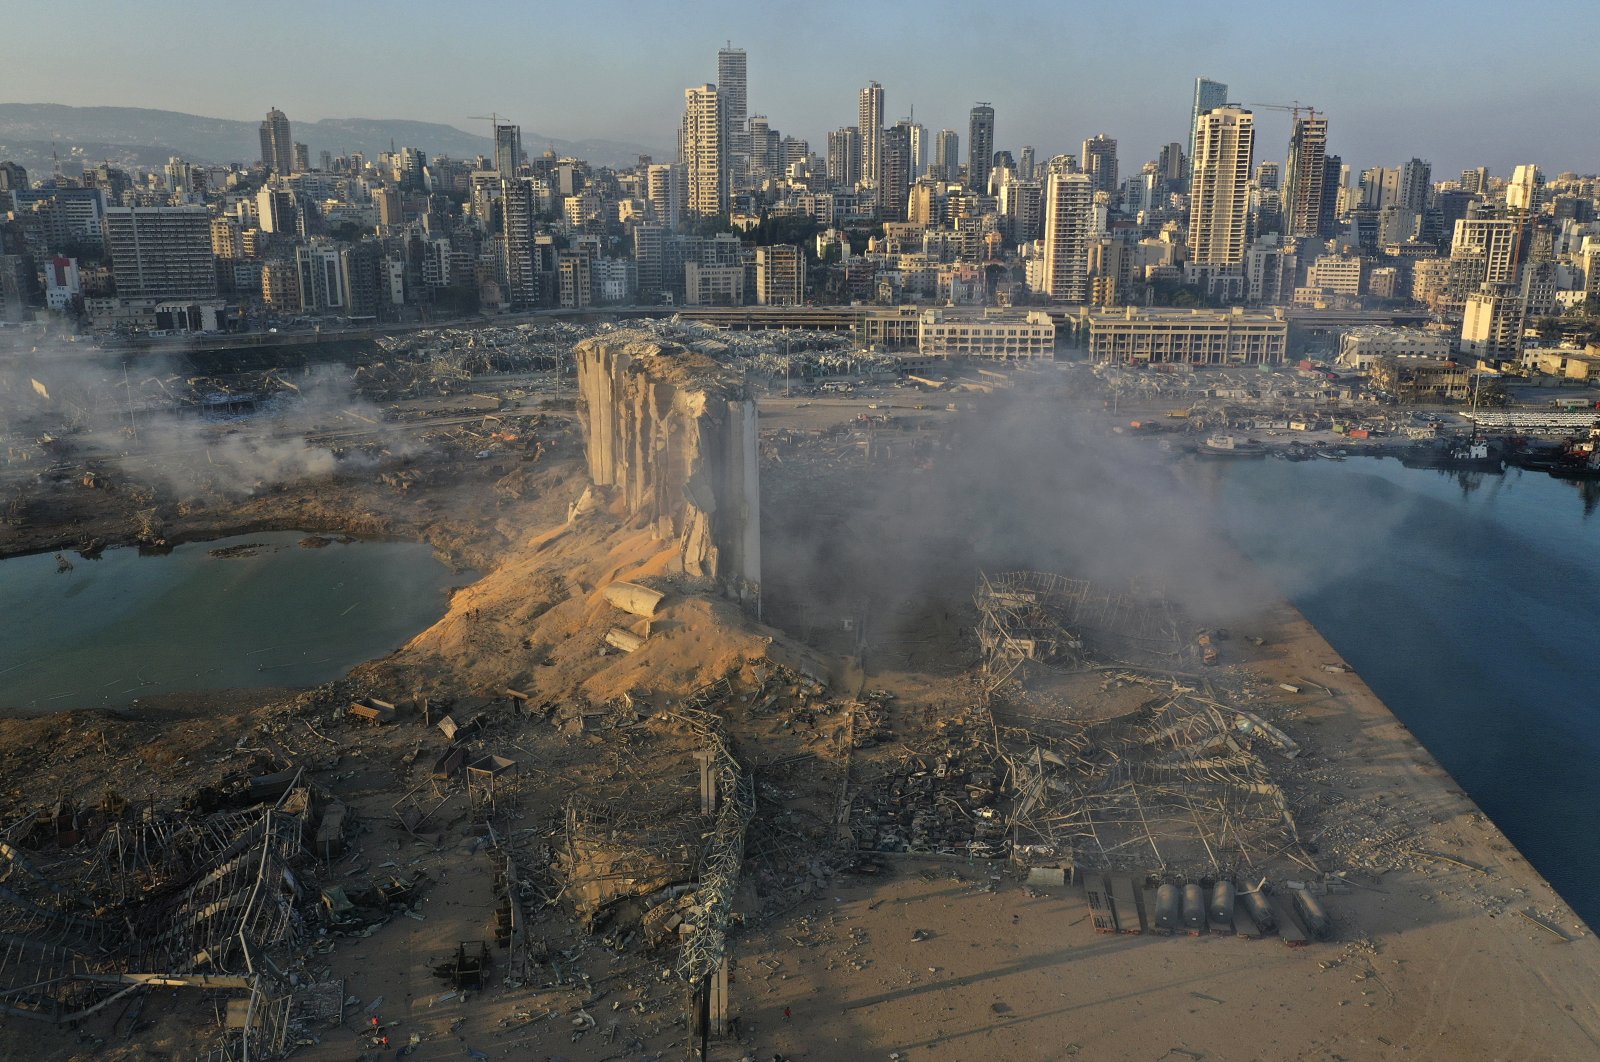 A drone photo shows the destruction after last year's explosion at the Port of Beirut, Lebanon, Aug. 5, 2020. (AP Photo)